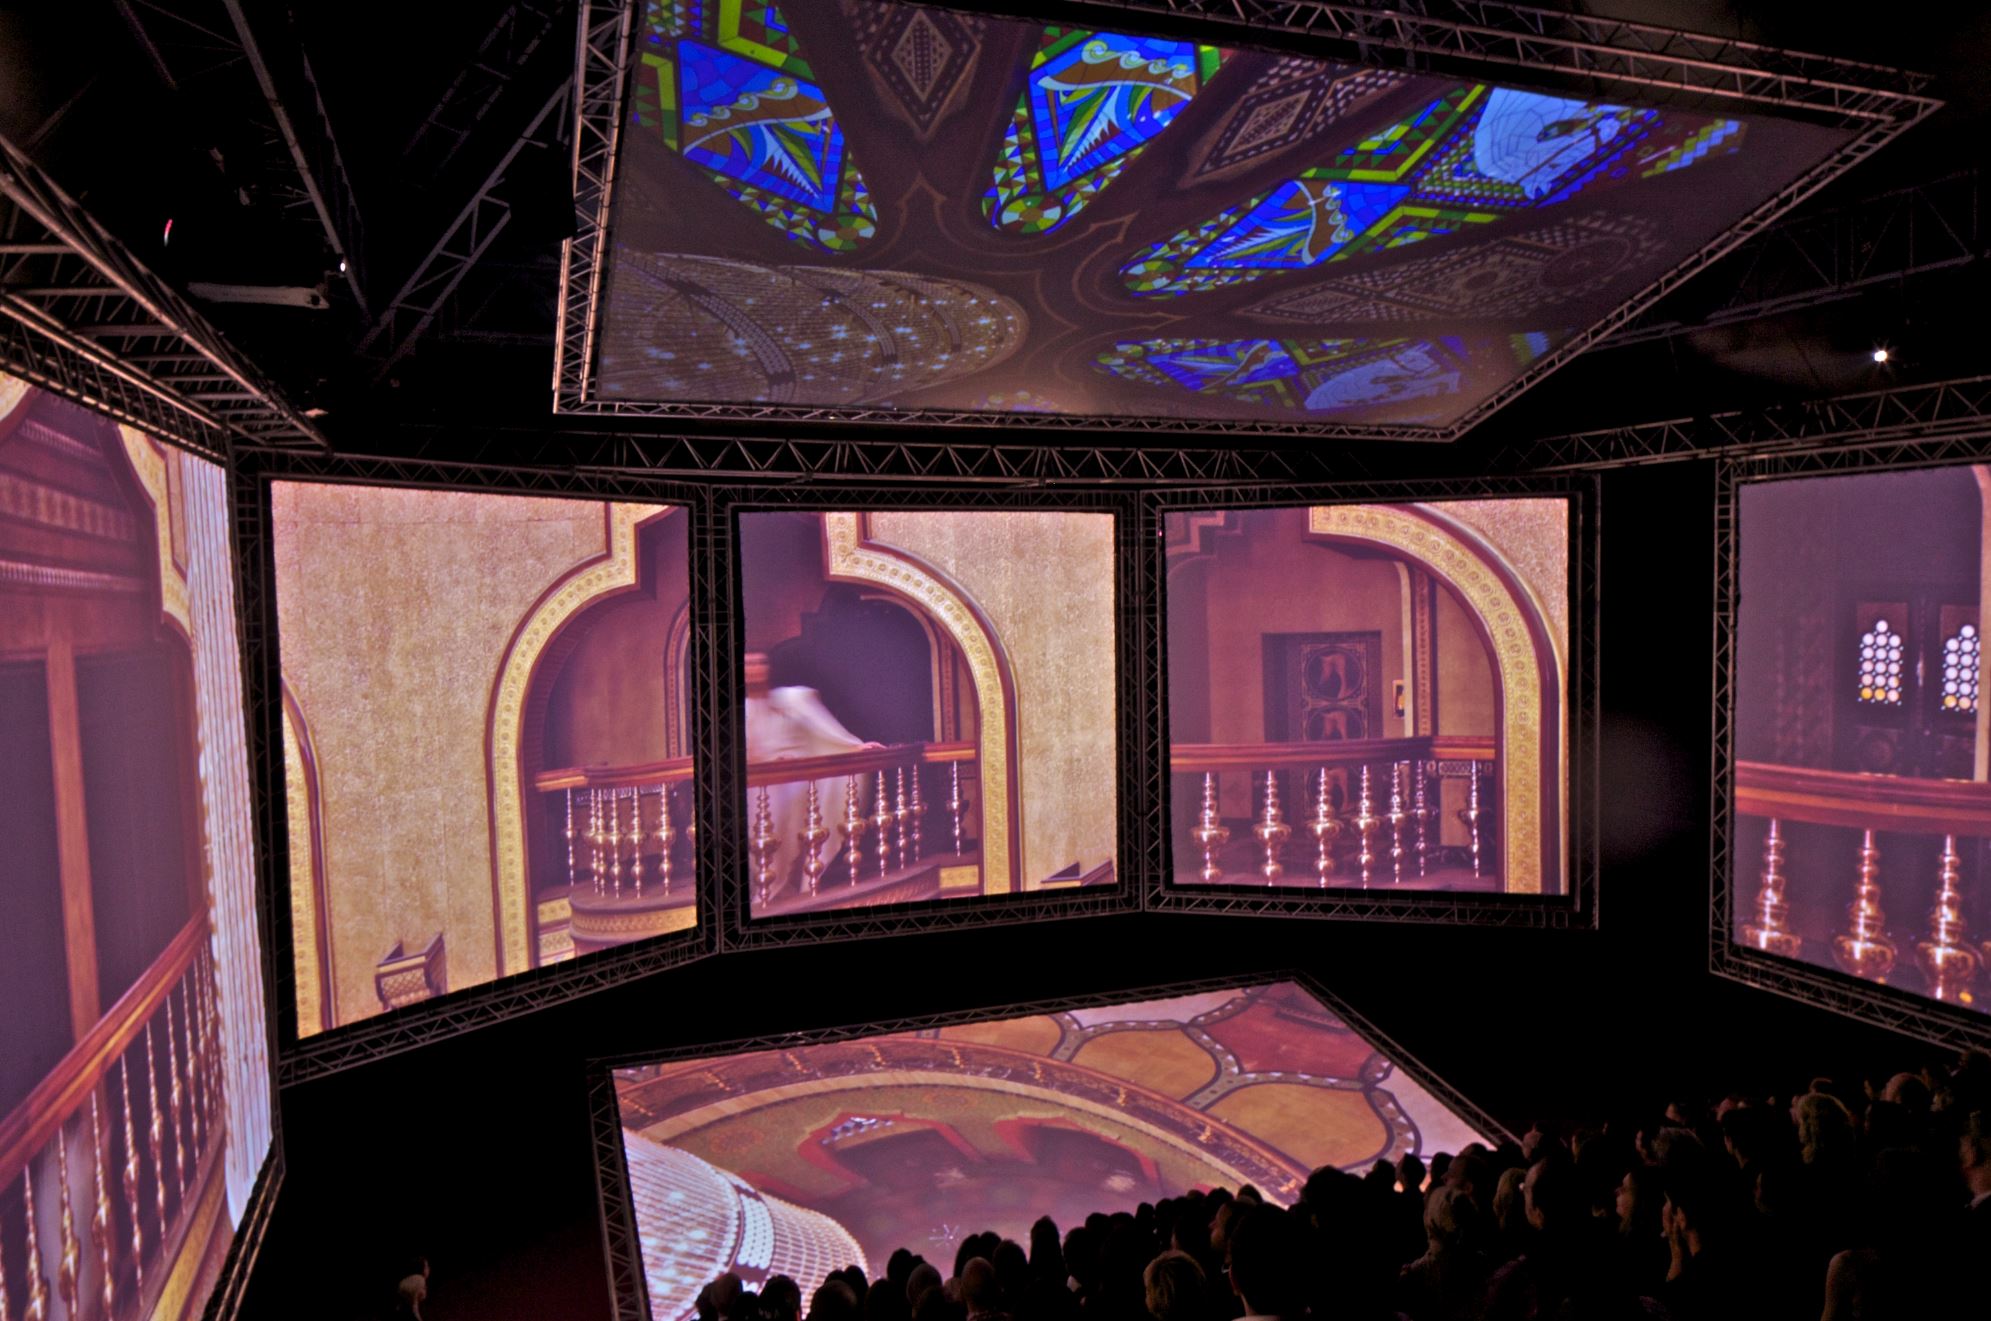 The pavilion would be used to screen of West's debut short film Cruel Summer. Image courtesy of OMA